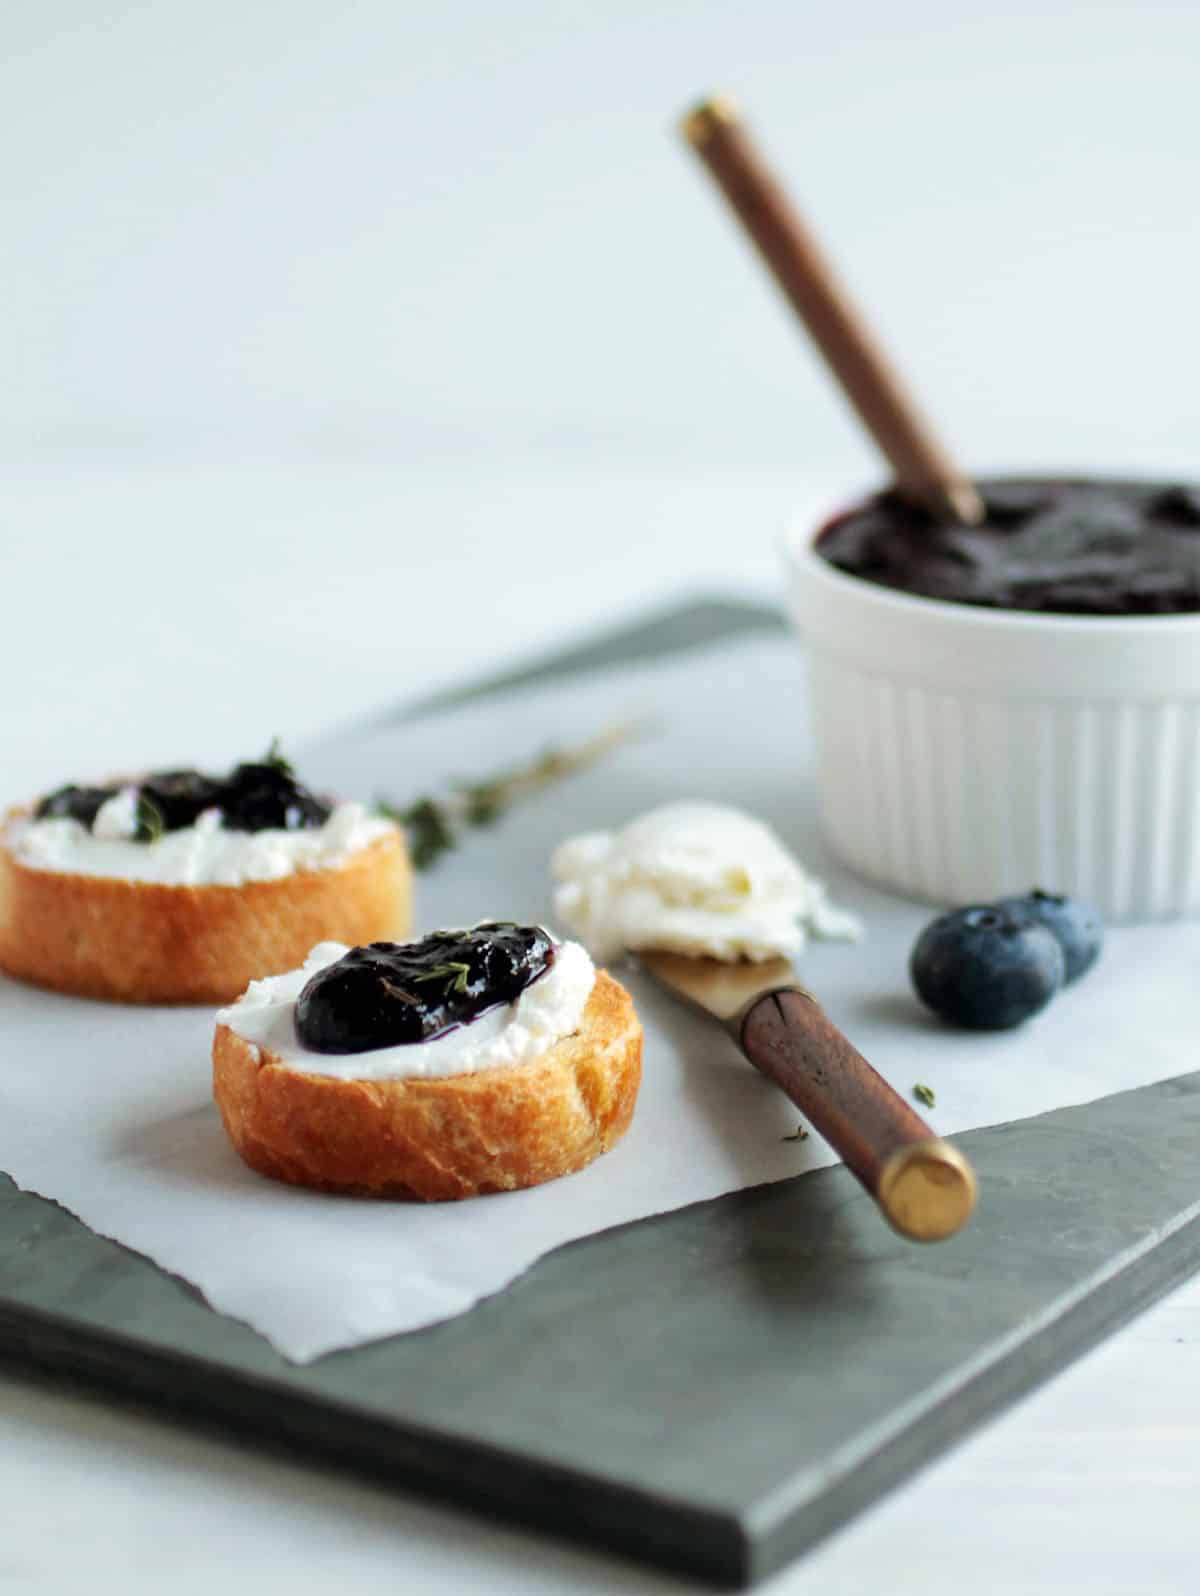 Blueberry jam on crostini with goat cheese.